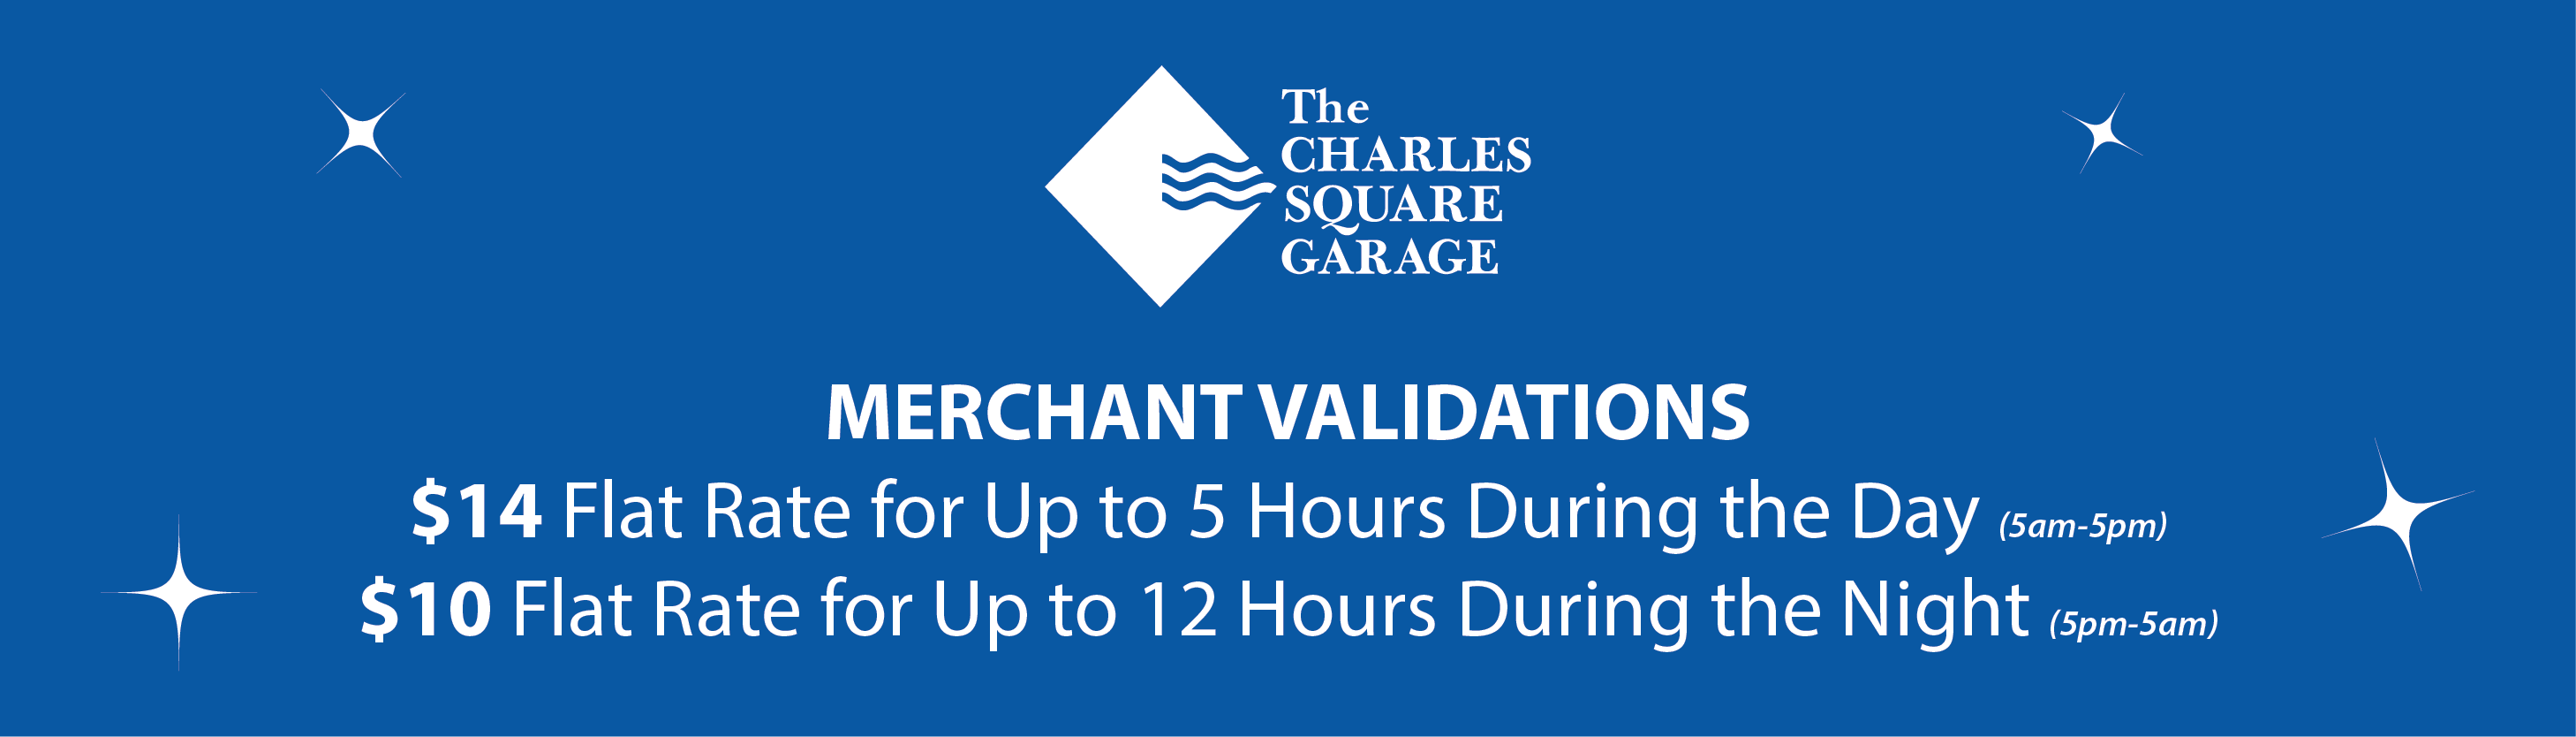 Merchant Validations $14 Flat Rate for Up to 5 hours During the Day - $10 Flat Rate for Up to 12 Hours During the Night